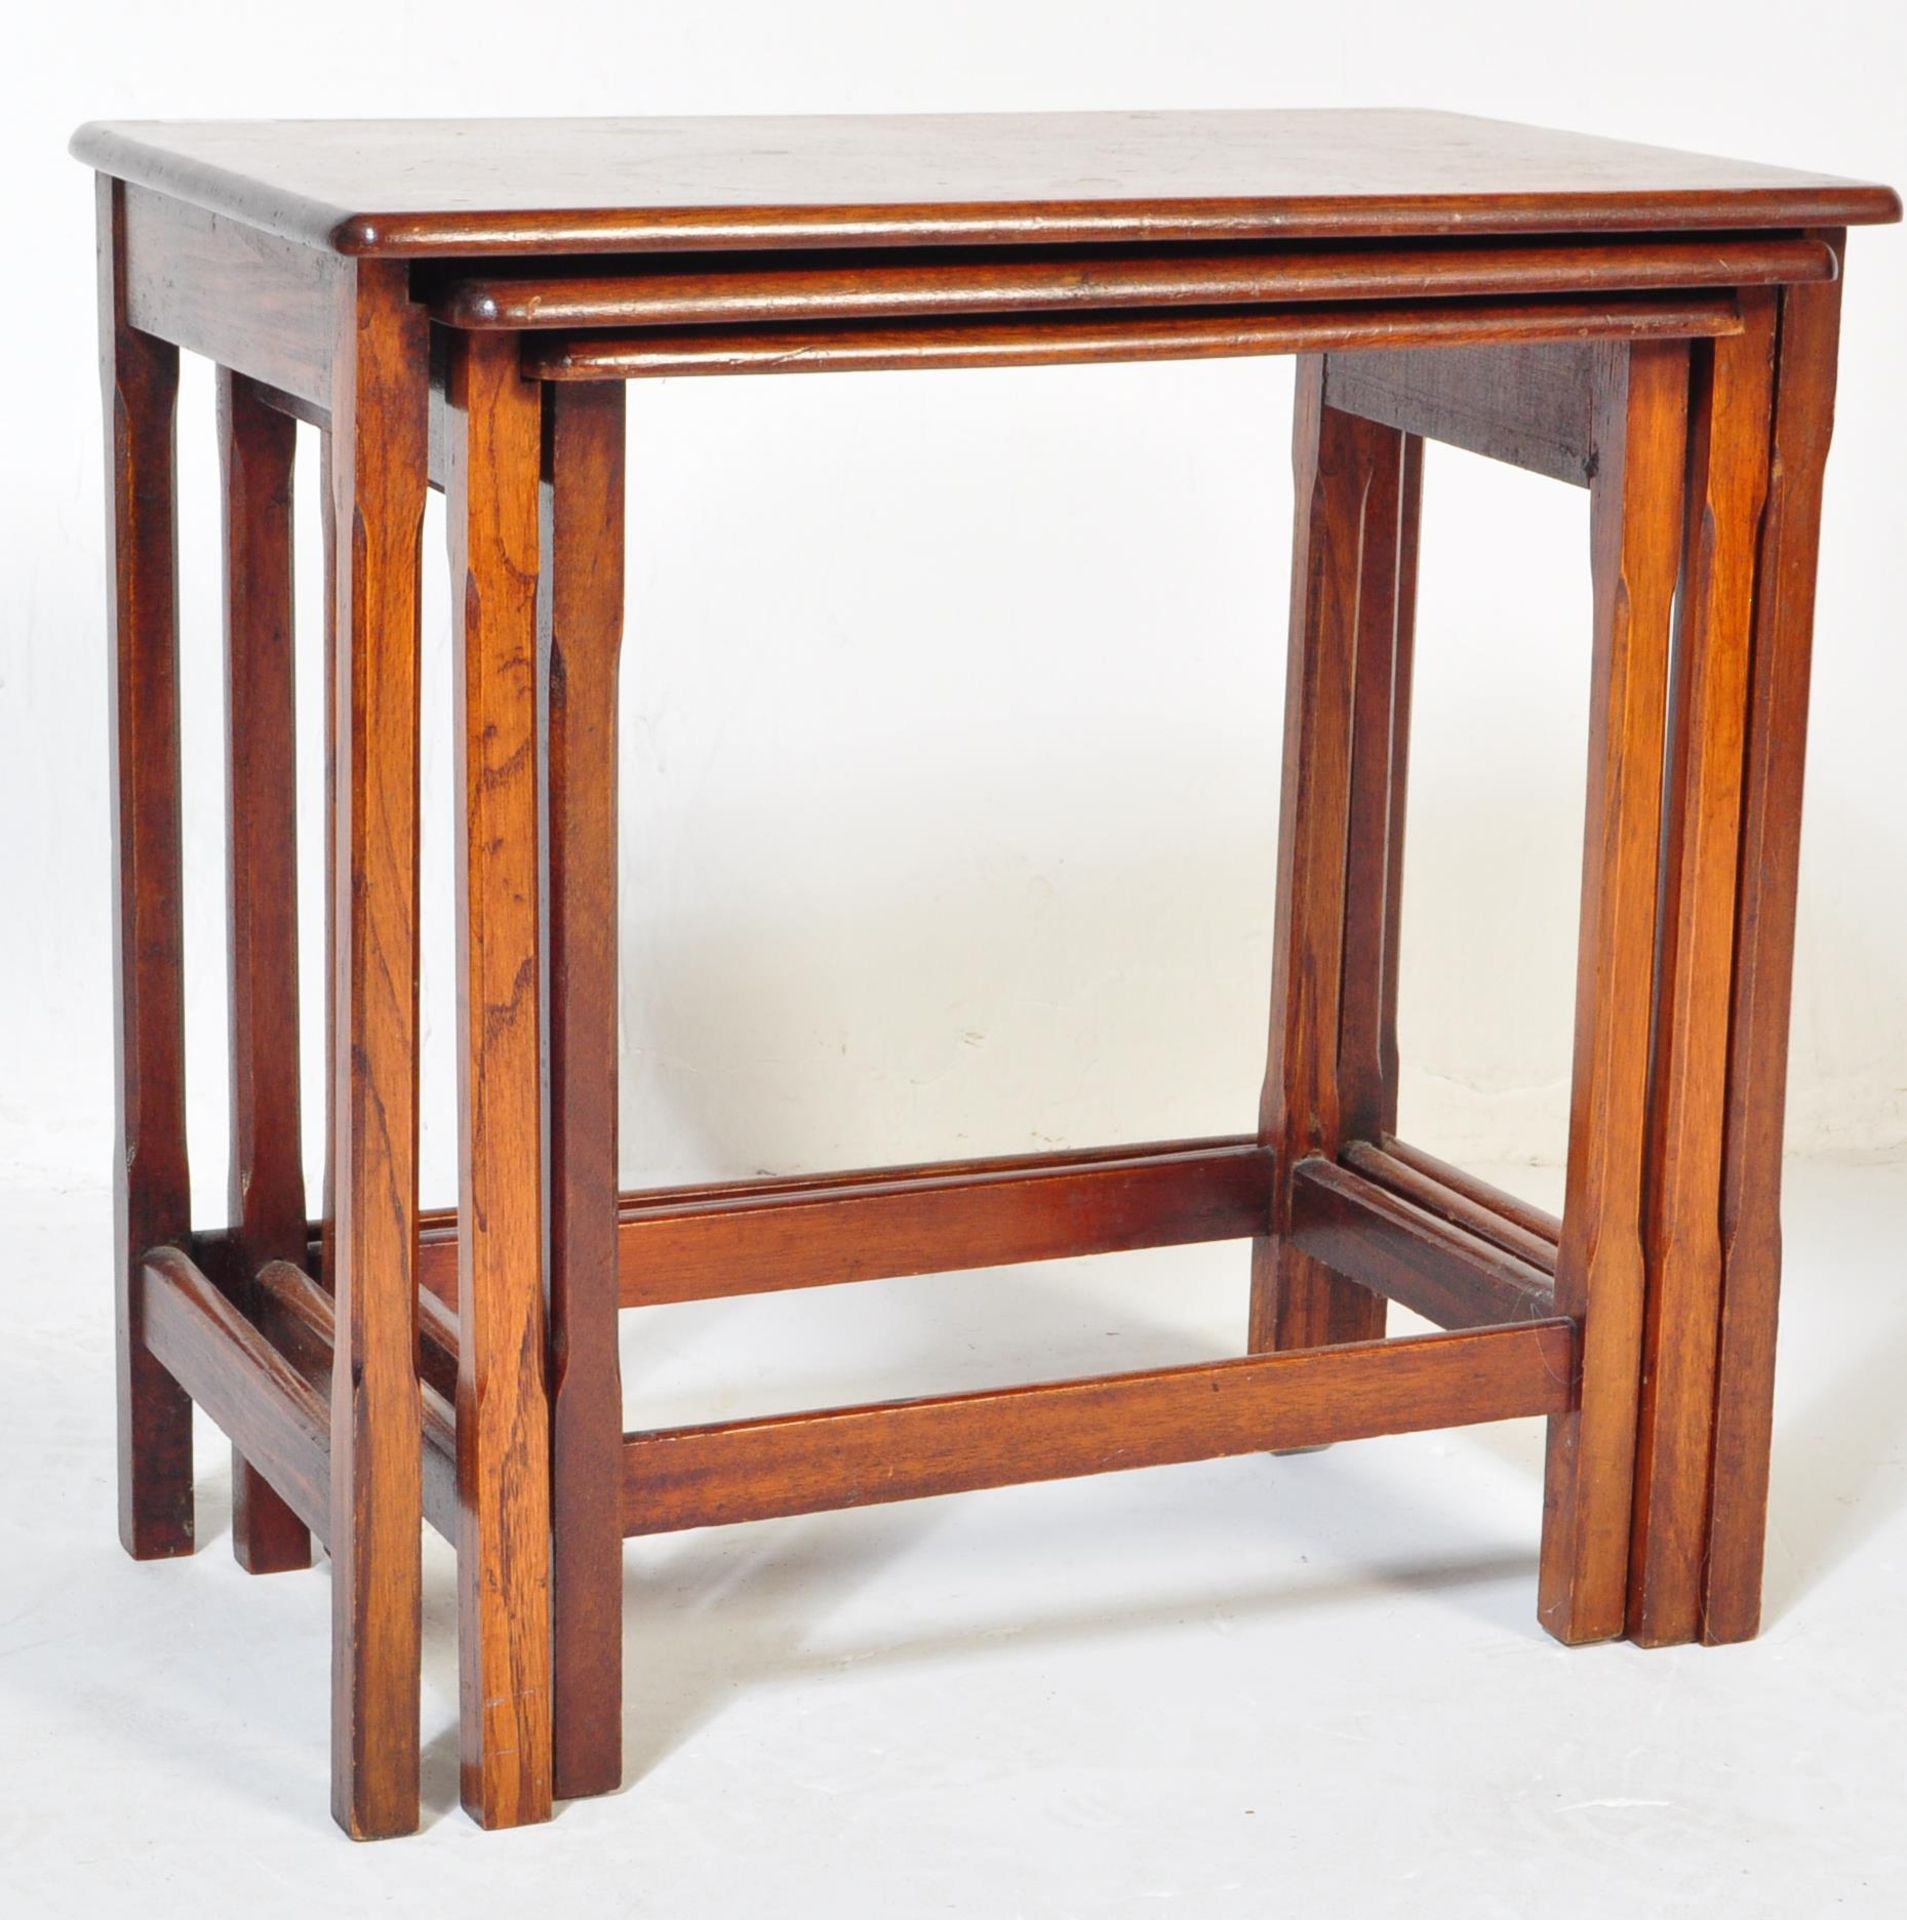 MID CENTURY TEAK WOOD NEST OF TABLES T/W ANOTHER - Image 5 of 5